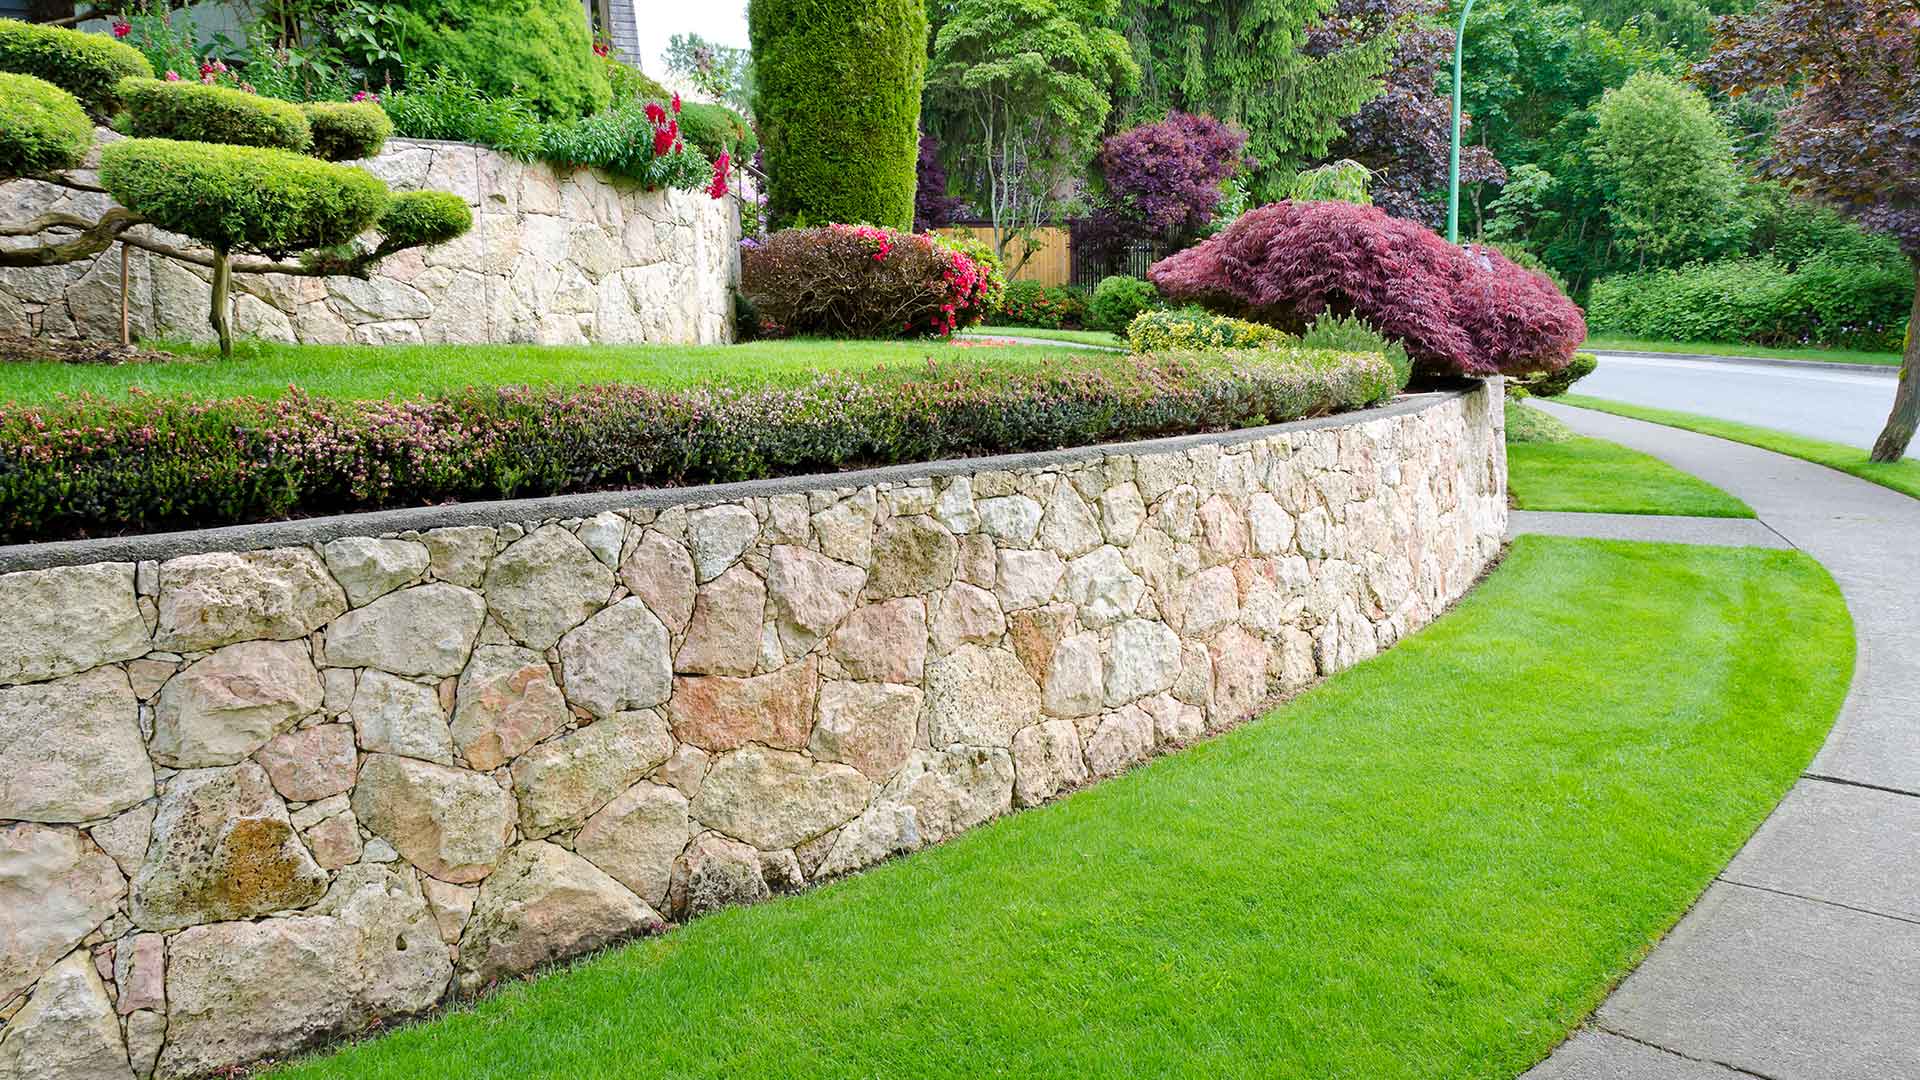 Your Guide to Installing a Retaining Wall... The RIGHT Way!